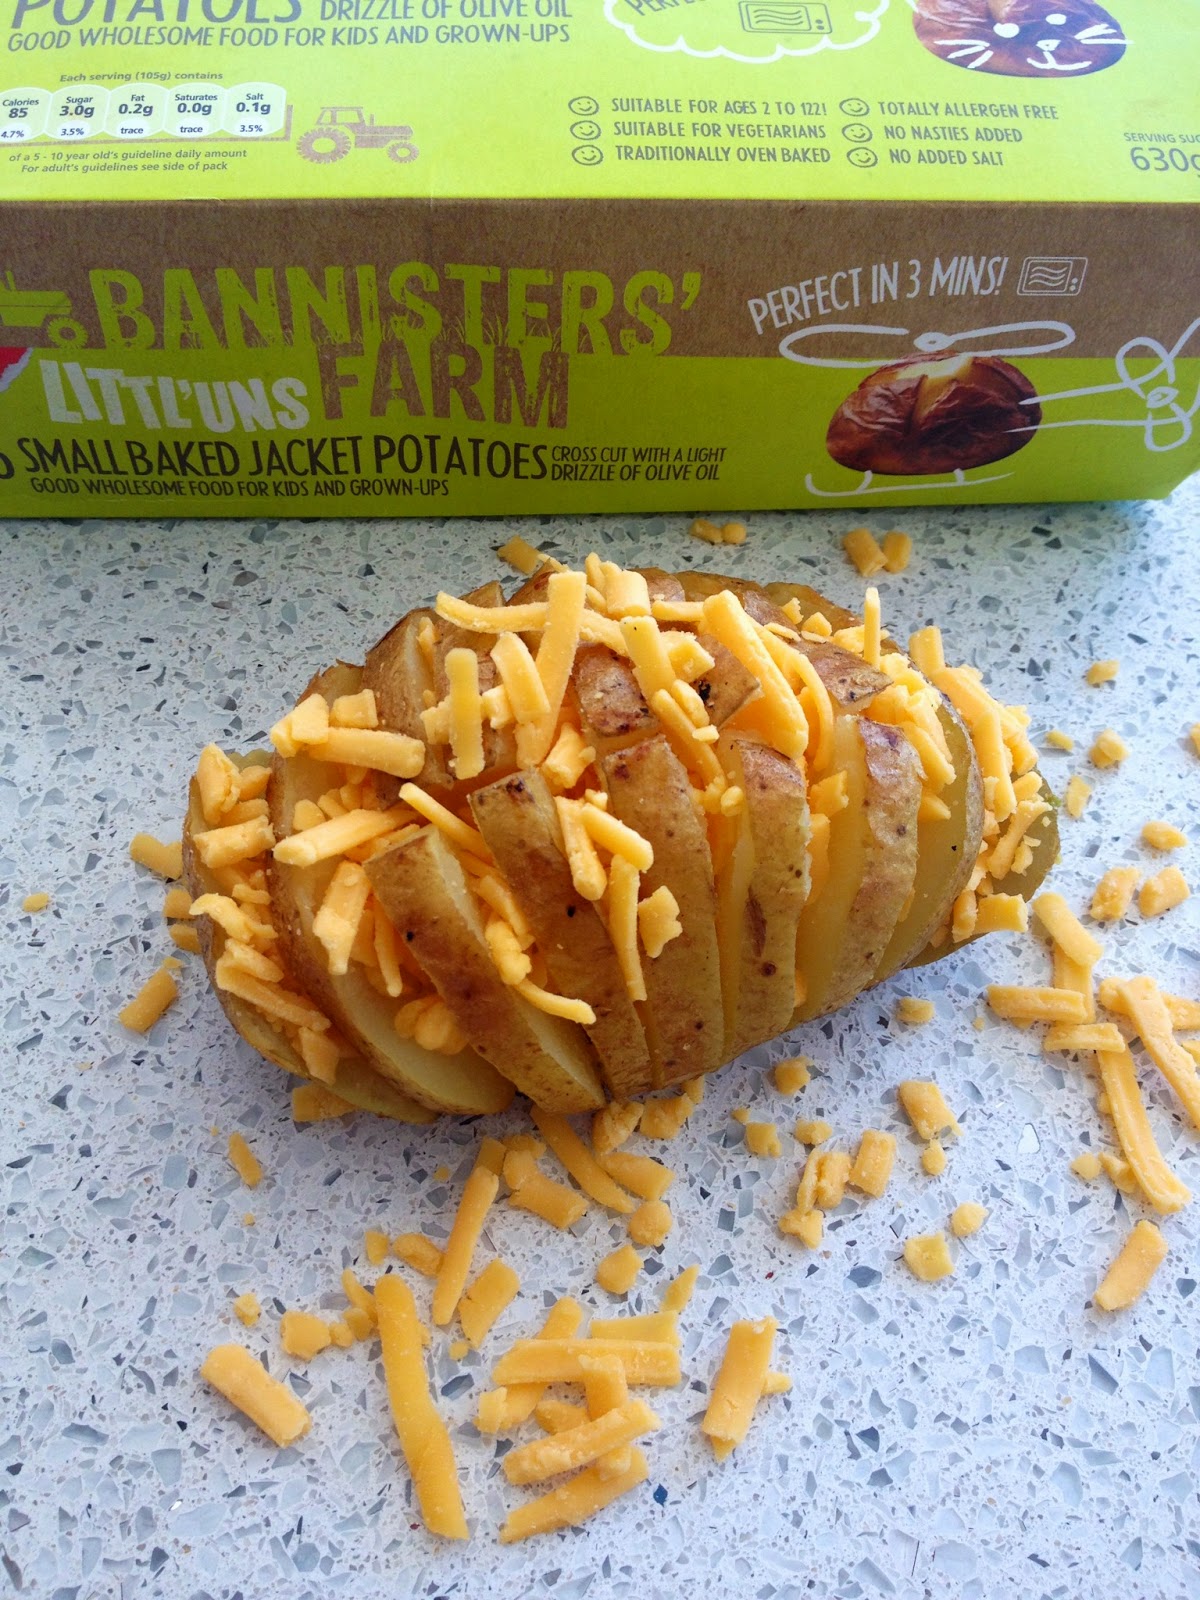 Baked Potato Recipes with Bannisters' Farm Littl'uns | Foodie Quine -  Edible Scottish Adventures